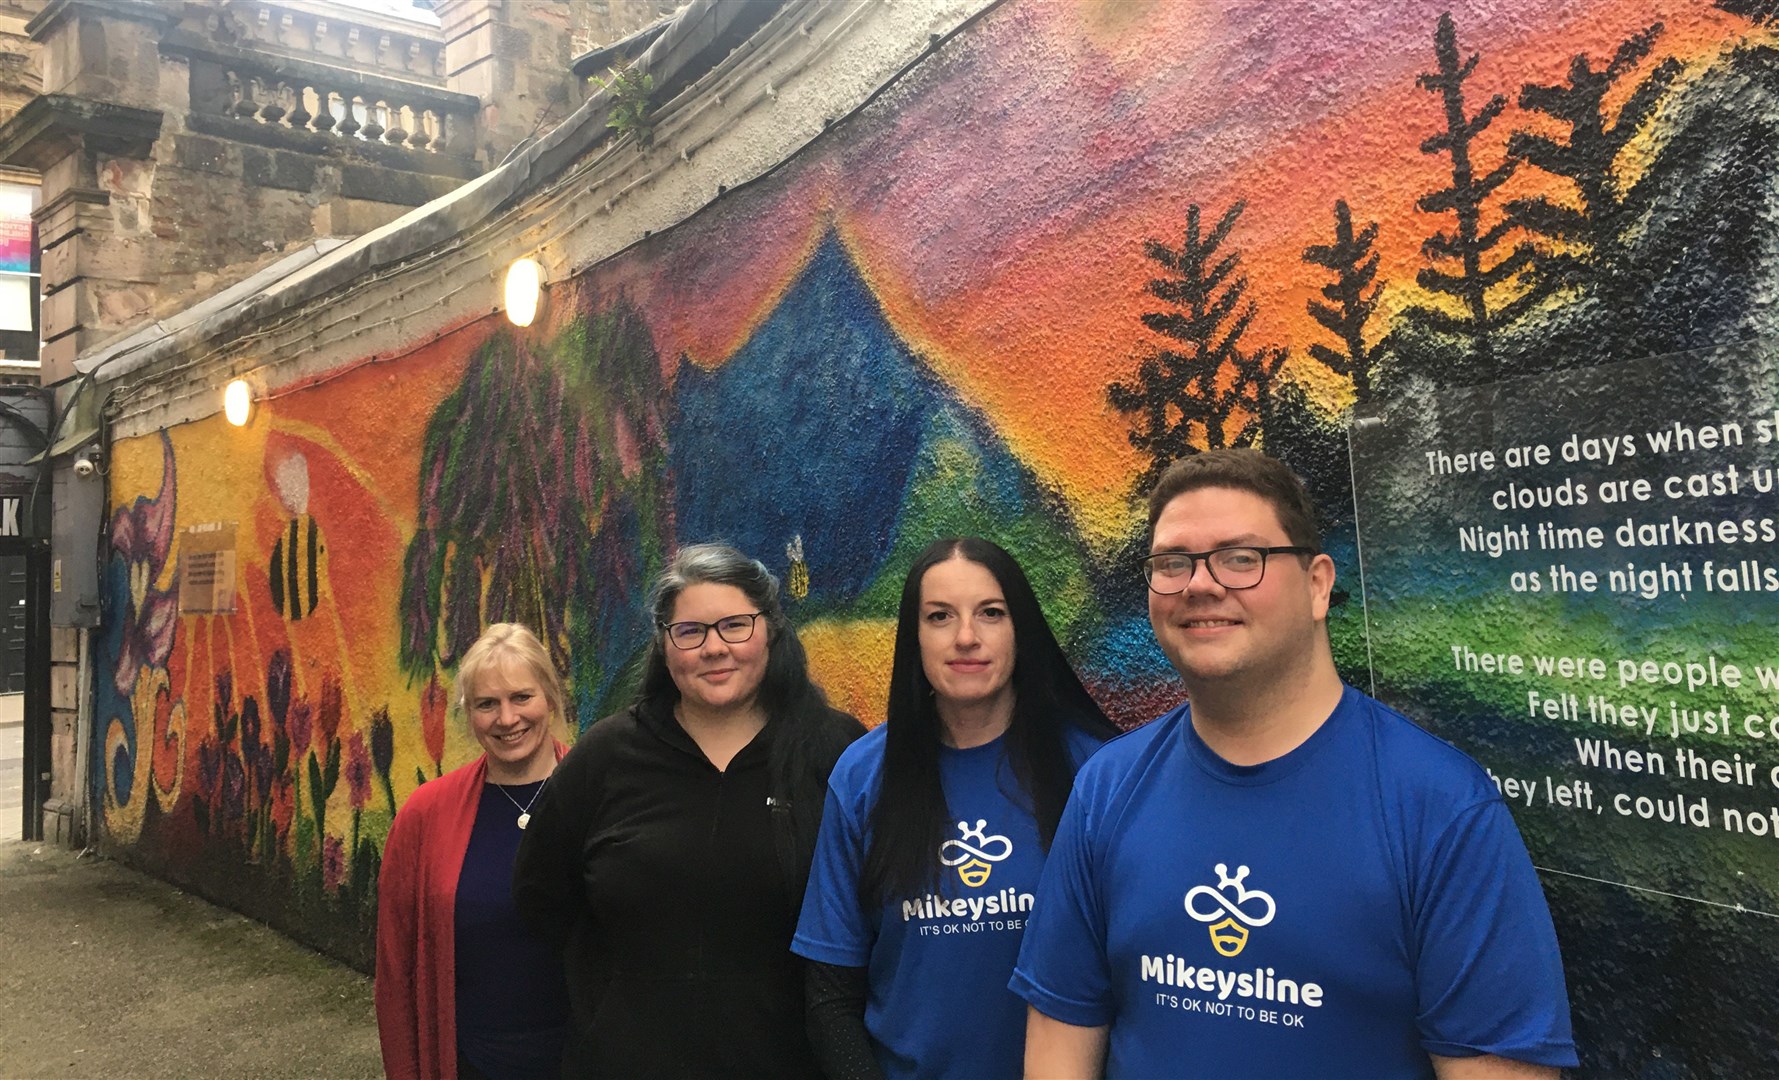 The team behind Miles for Mikeysline (from left) Emily Stokes, service manager, Emilie Roy, support worker, Clare Gordon, support worker, and Darrel Paterson, volunteer fundraiser.